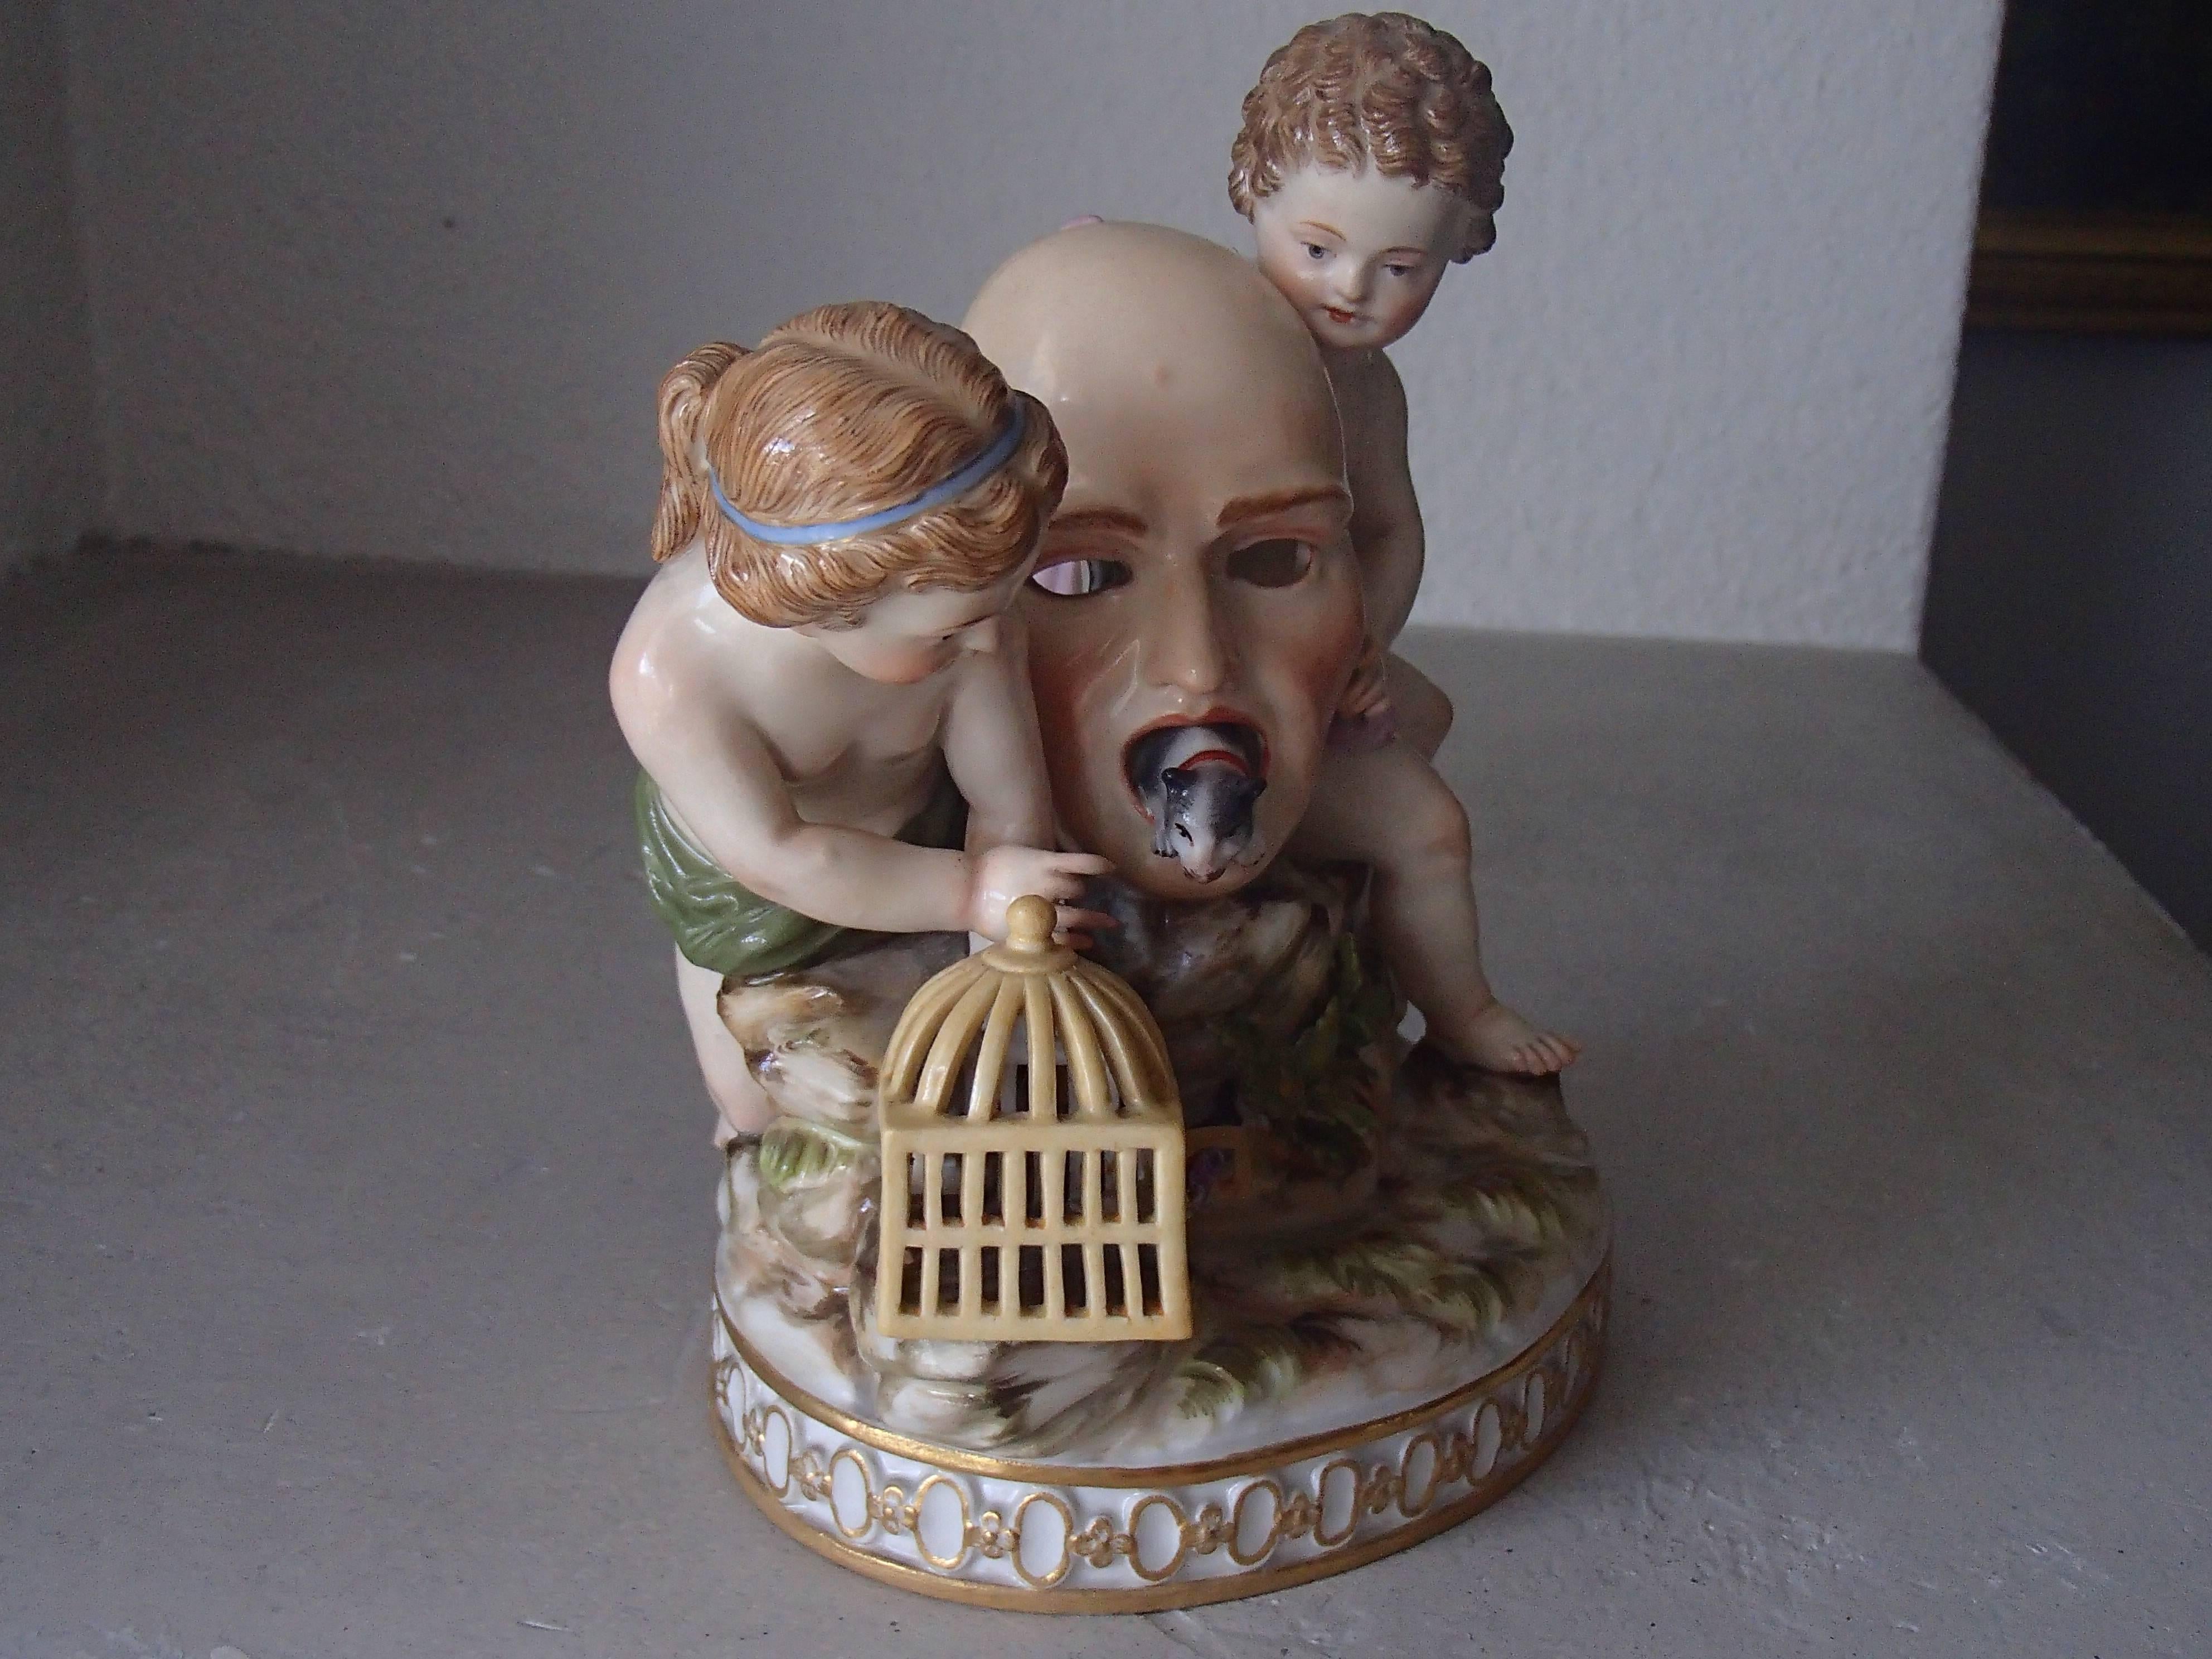 19th century Meissen figurines attributed to Ernst August Leuteritz with two putts holding a masc from which mouths come a little dog and a birdcage. 
Perfect condition.